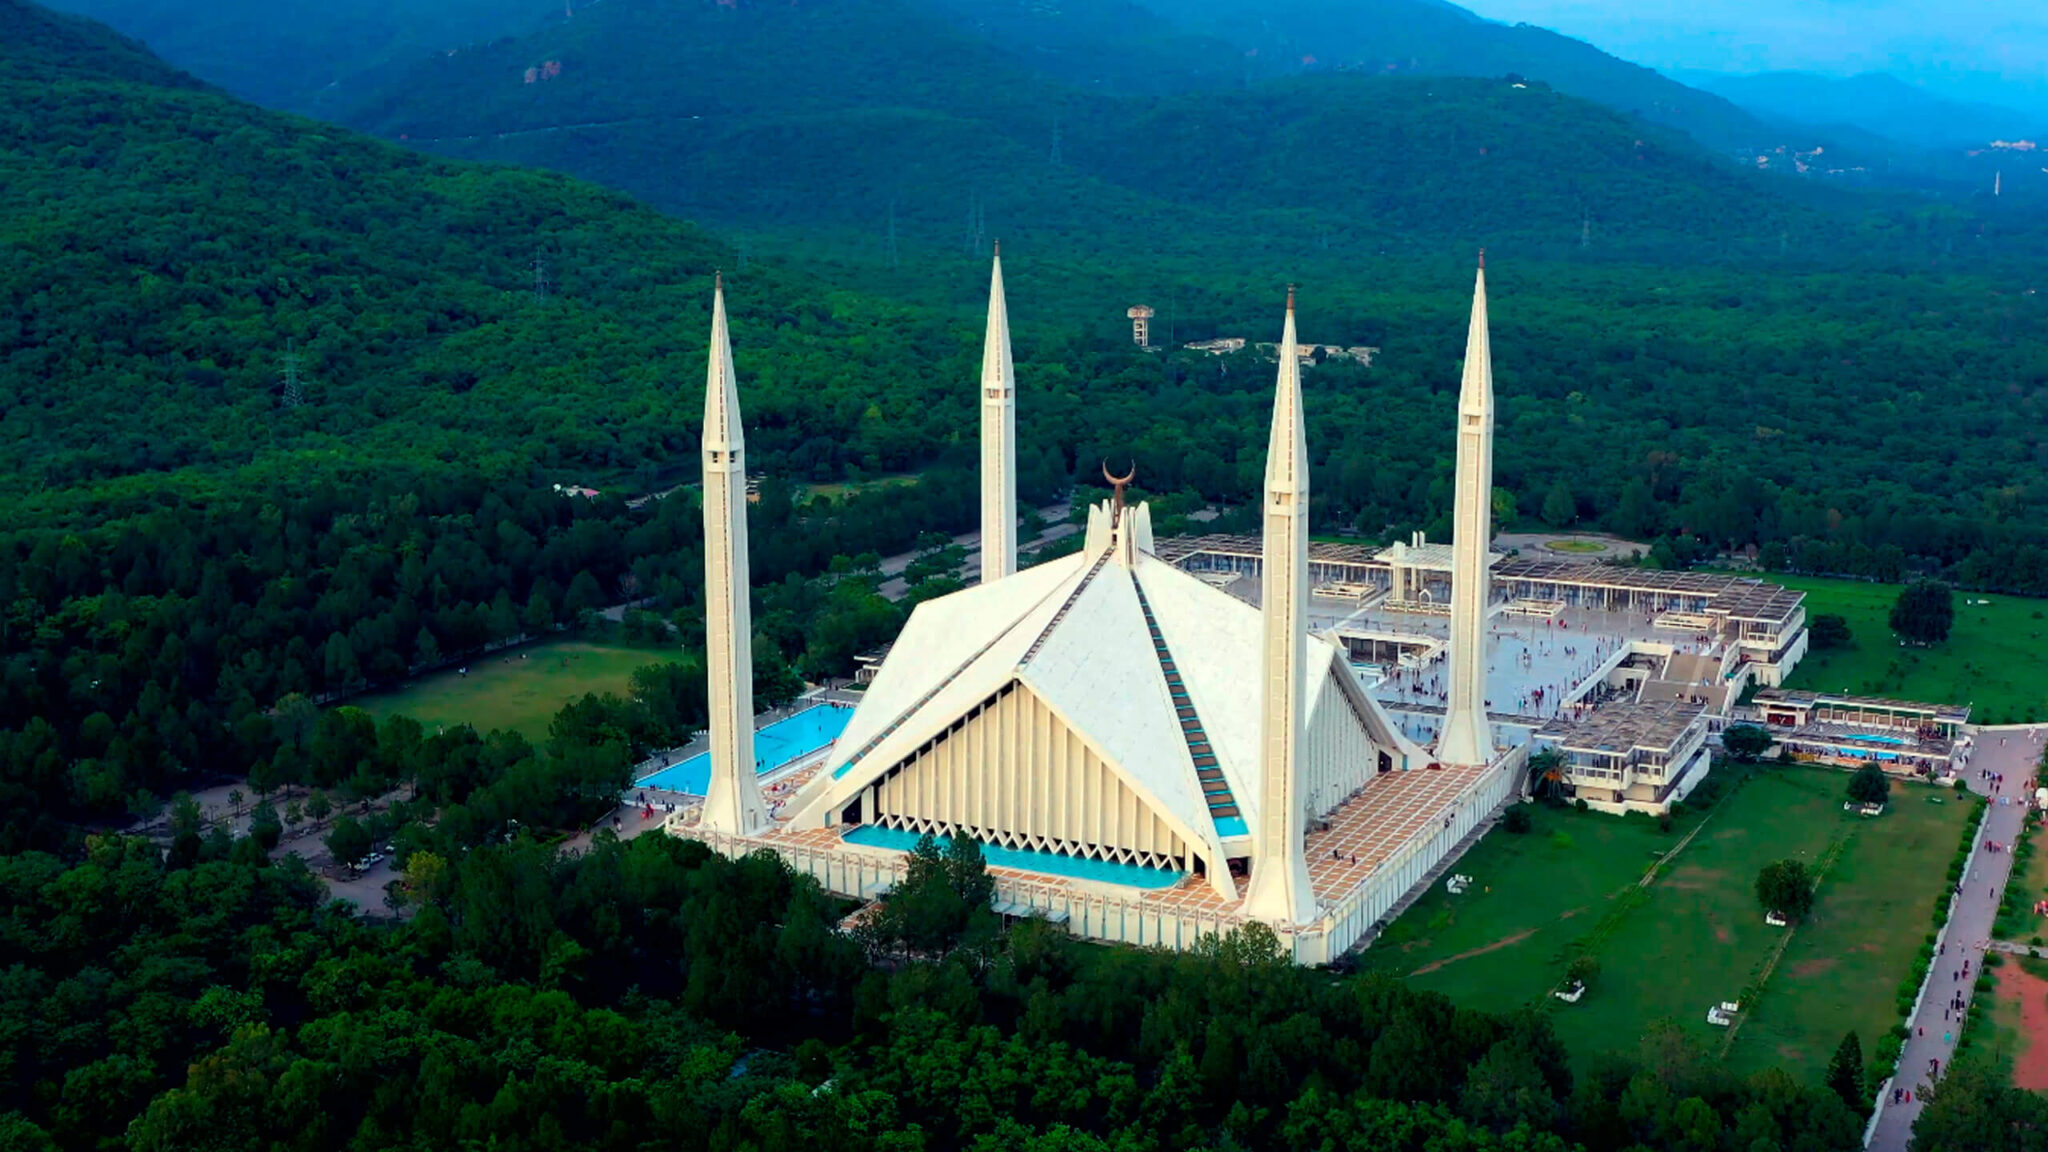 islamabad tour places